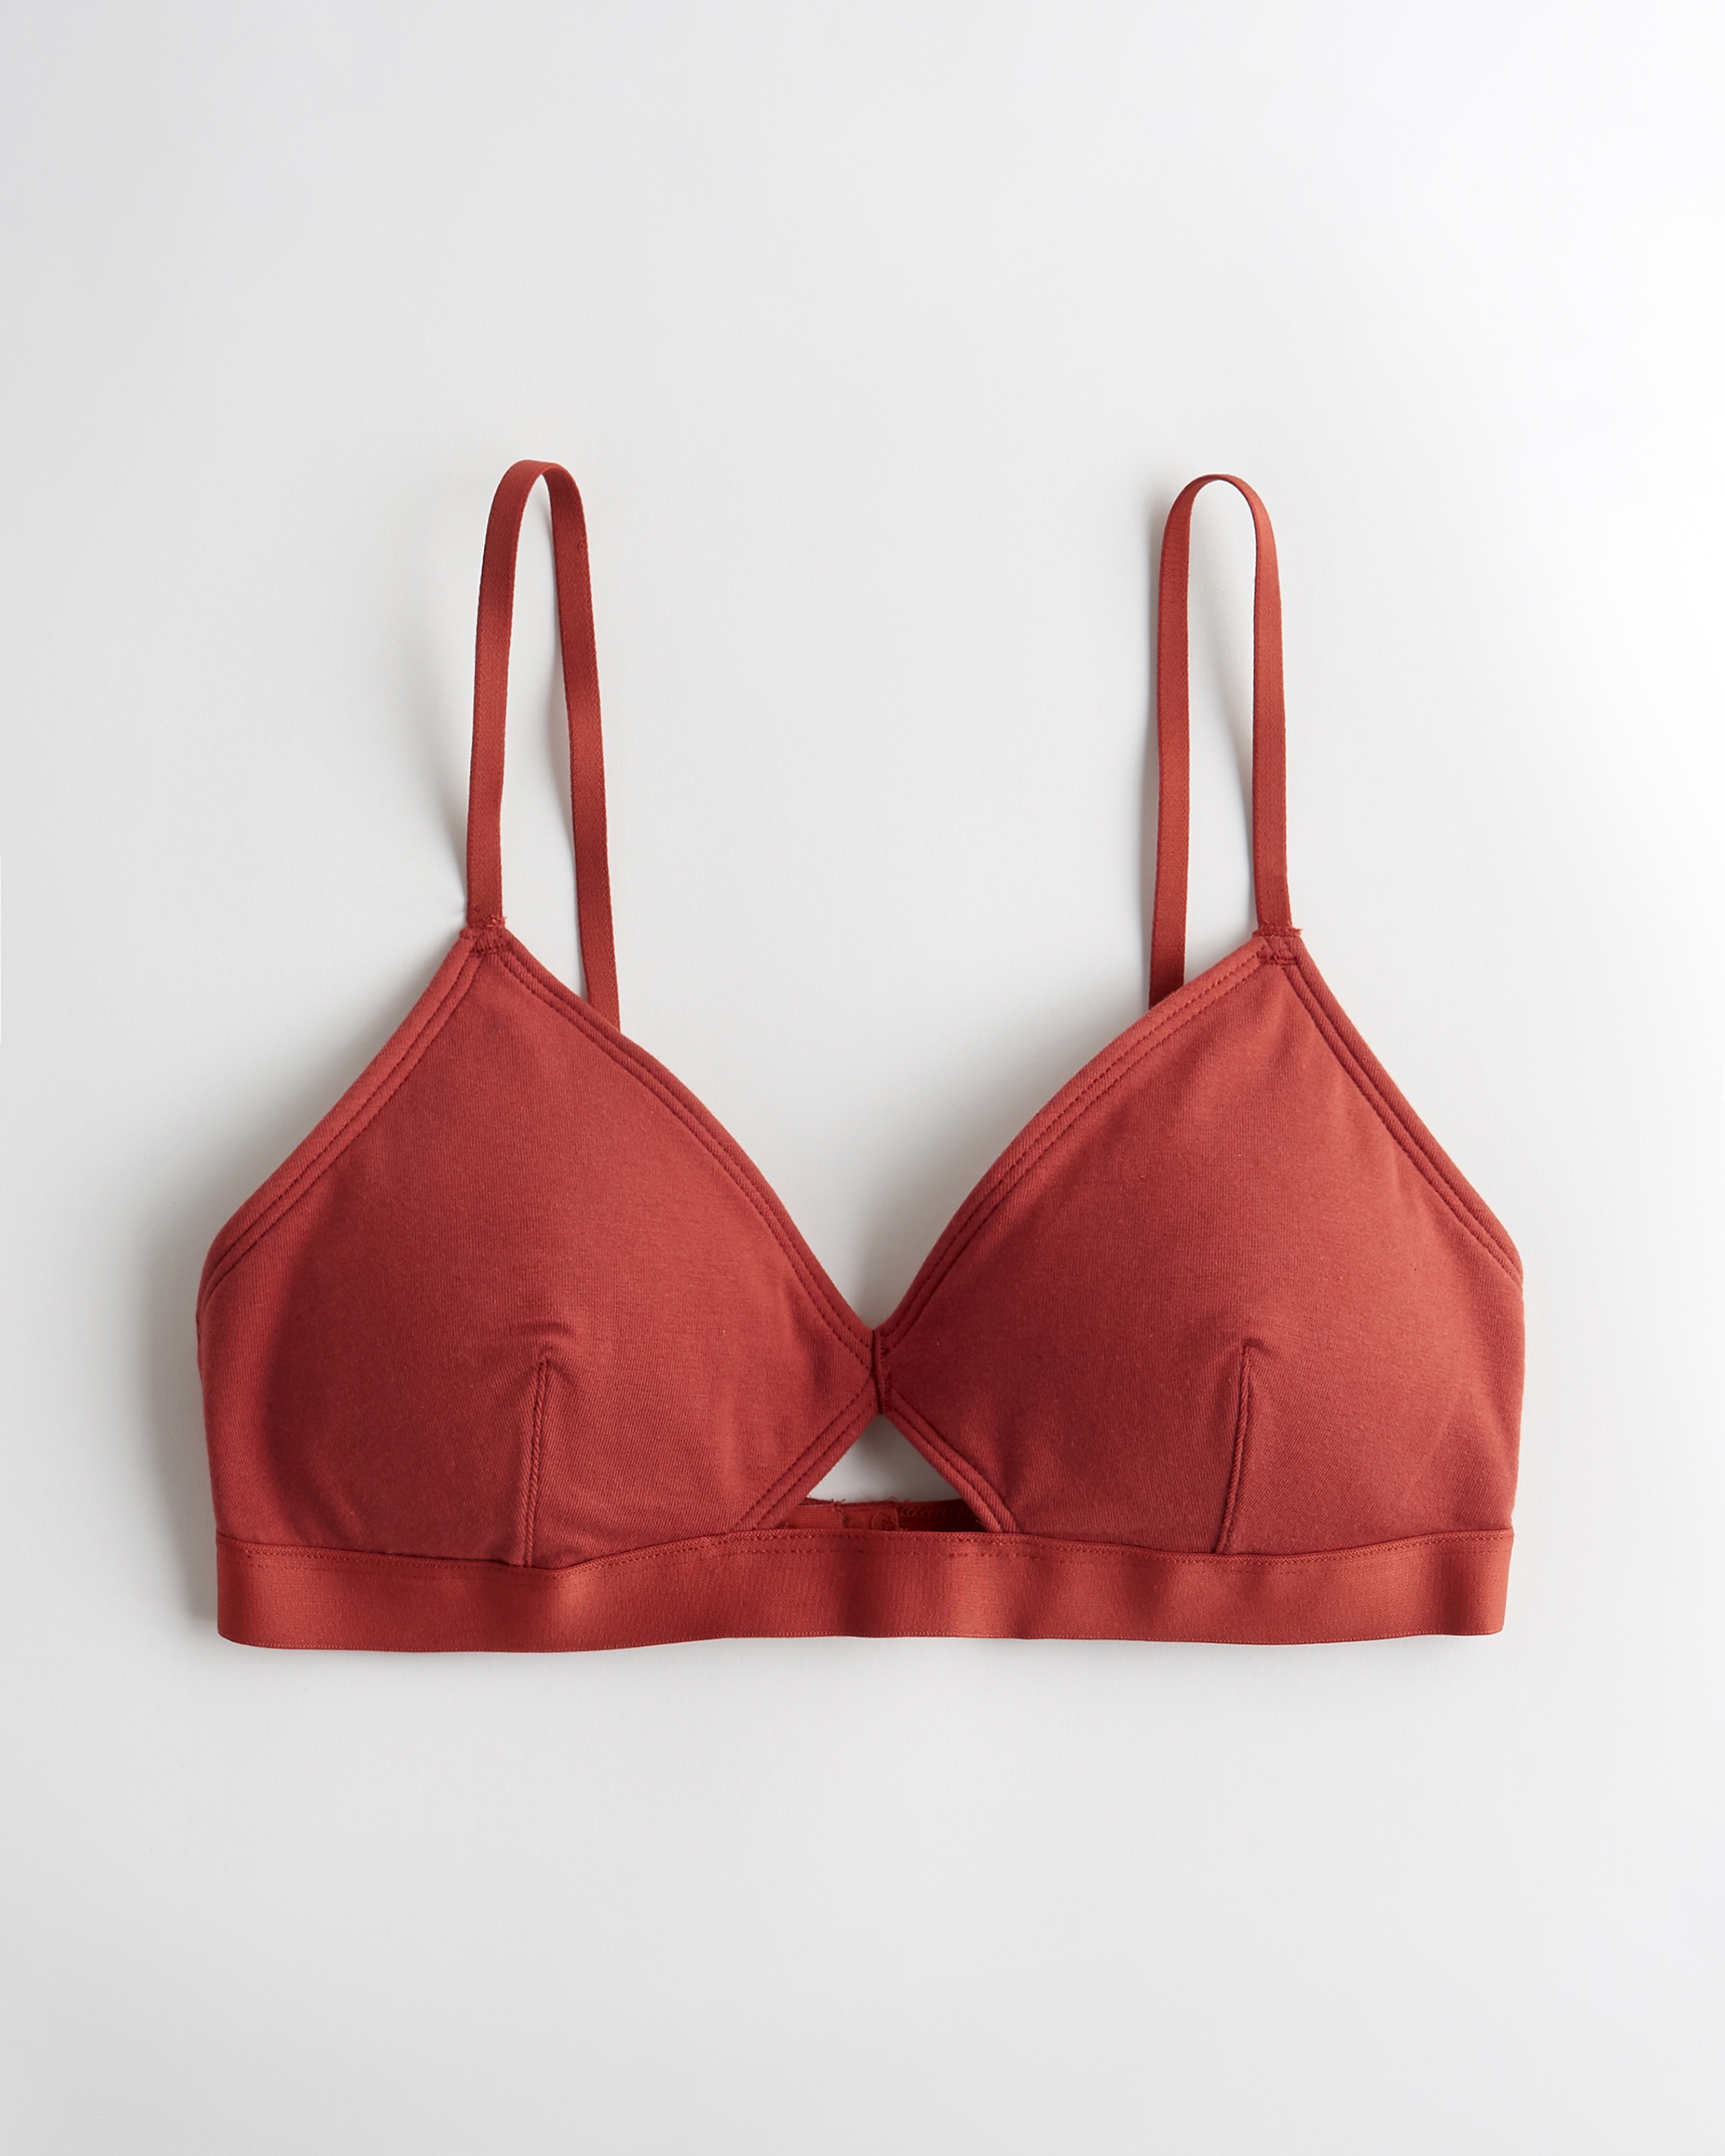 gilly hicks bralette size chart